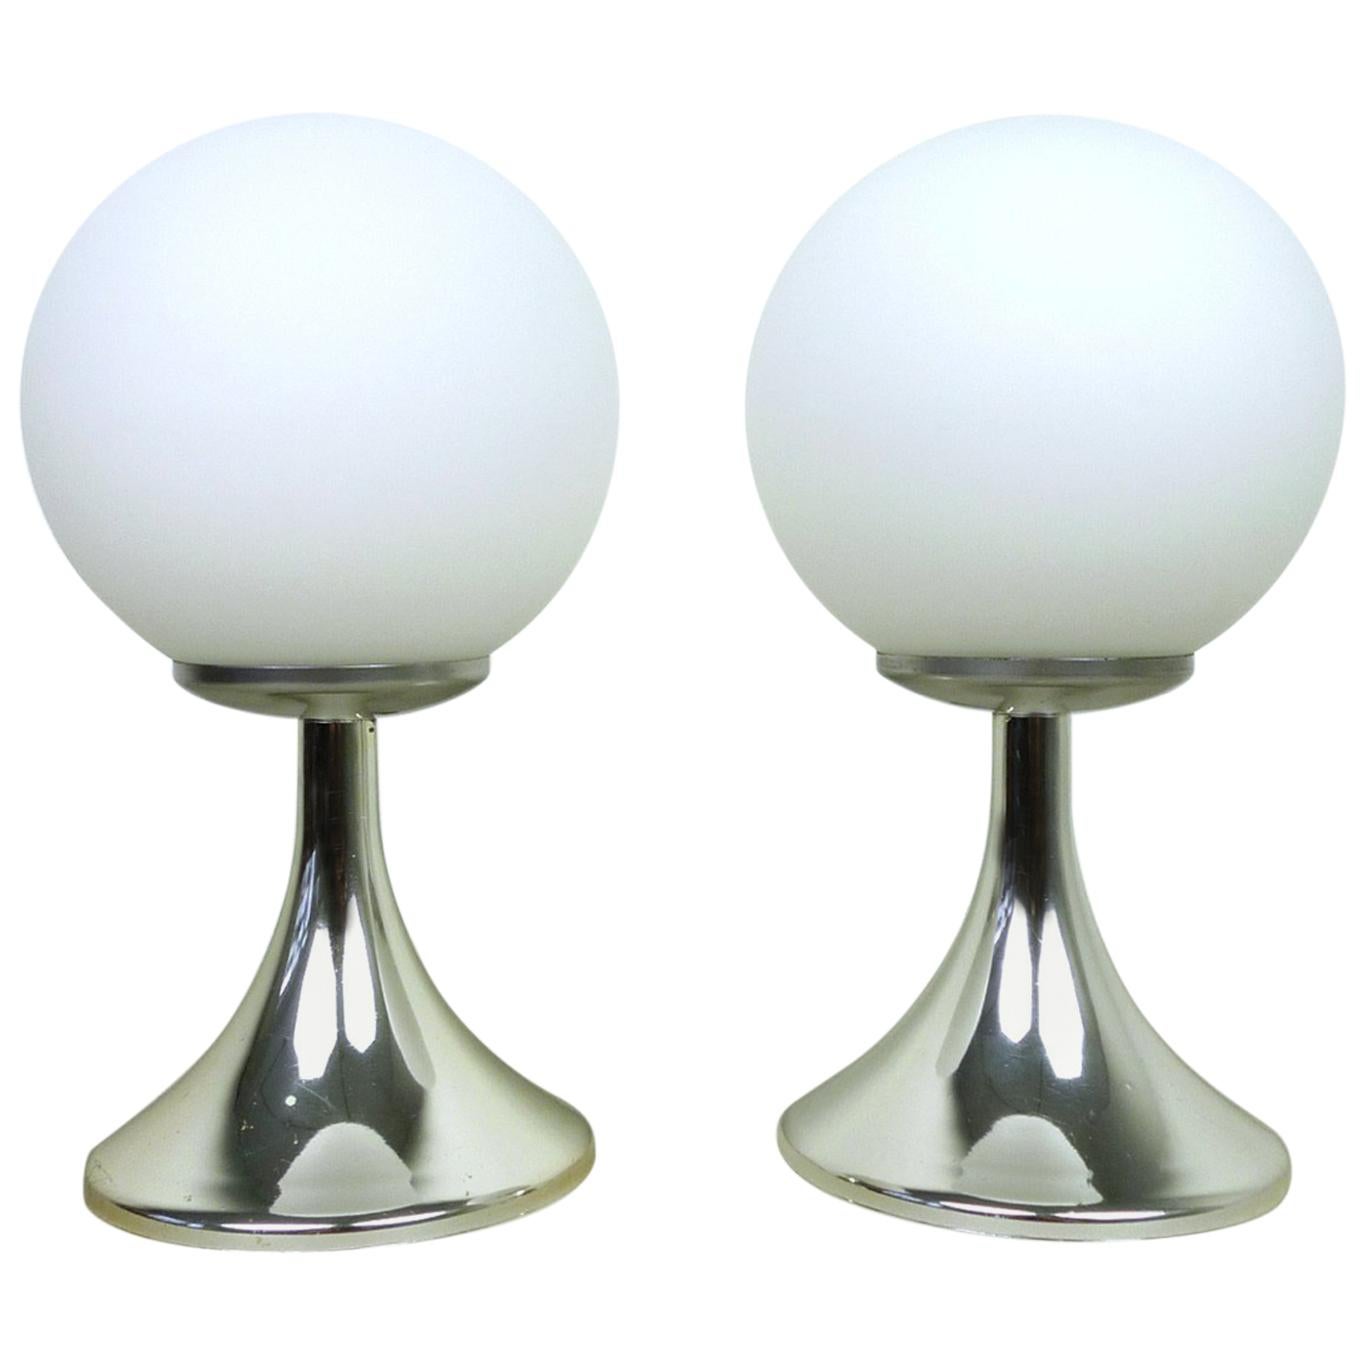 Pair of Table Lamps with Chromed Tulip Bases, Germany, 1960s